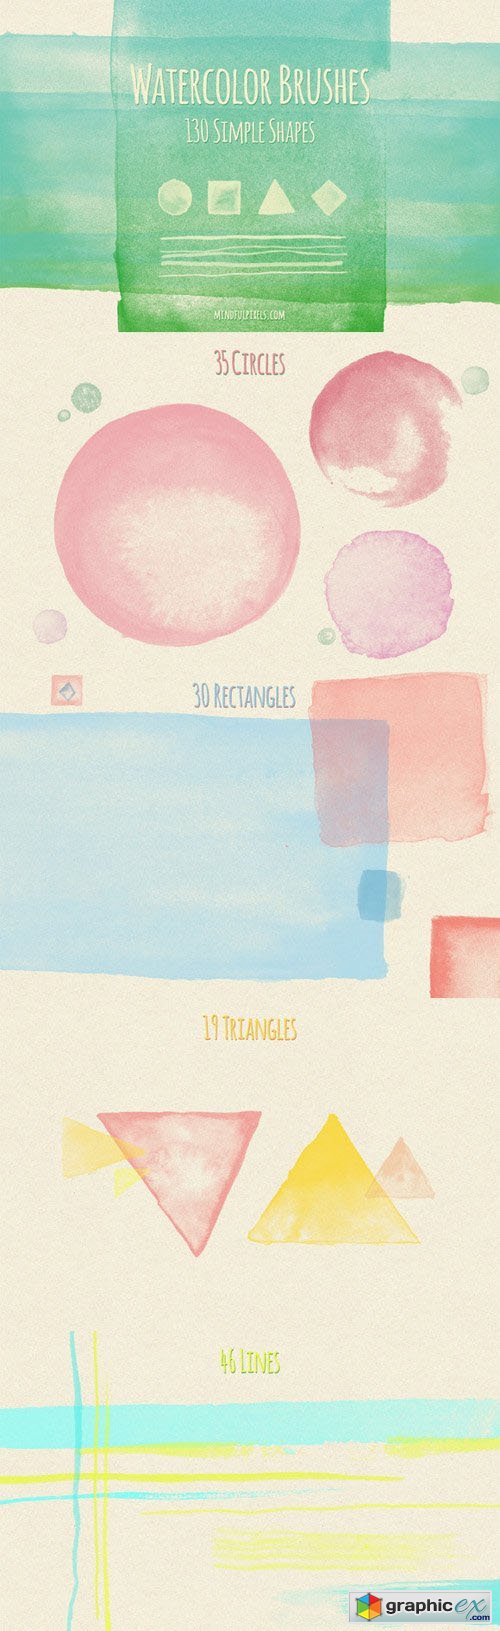 130 Simple Shapes Watercolor Brushes 4204